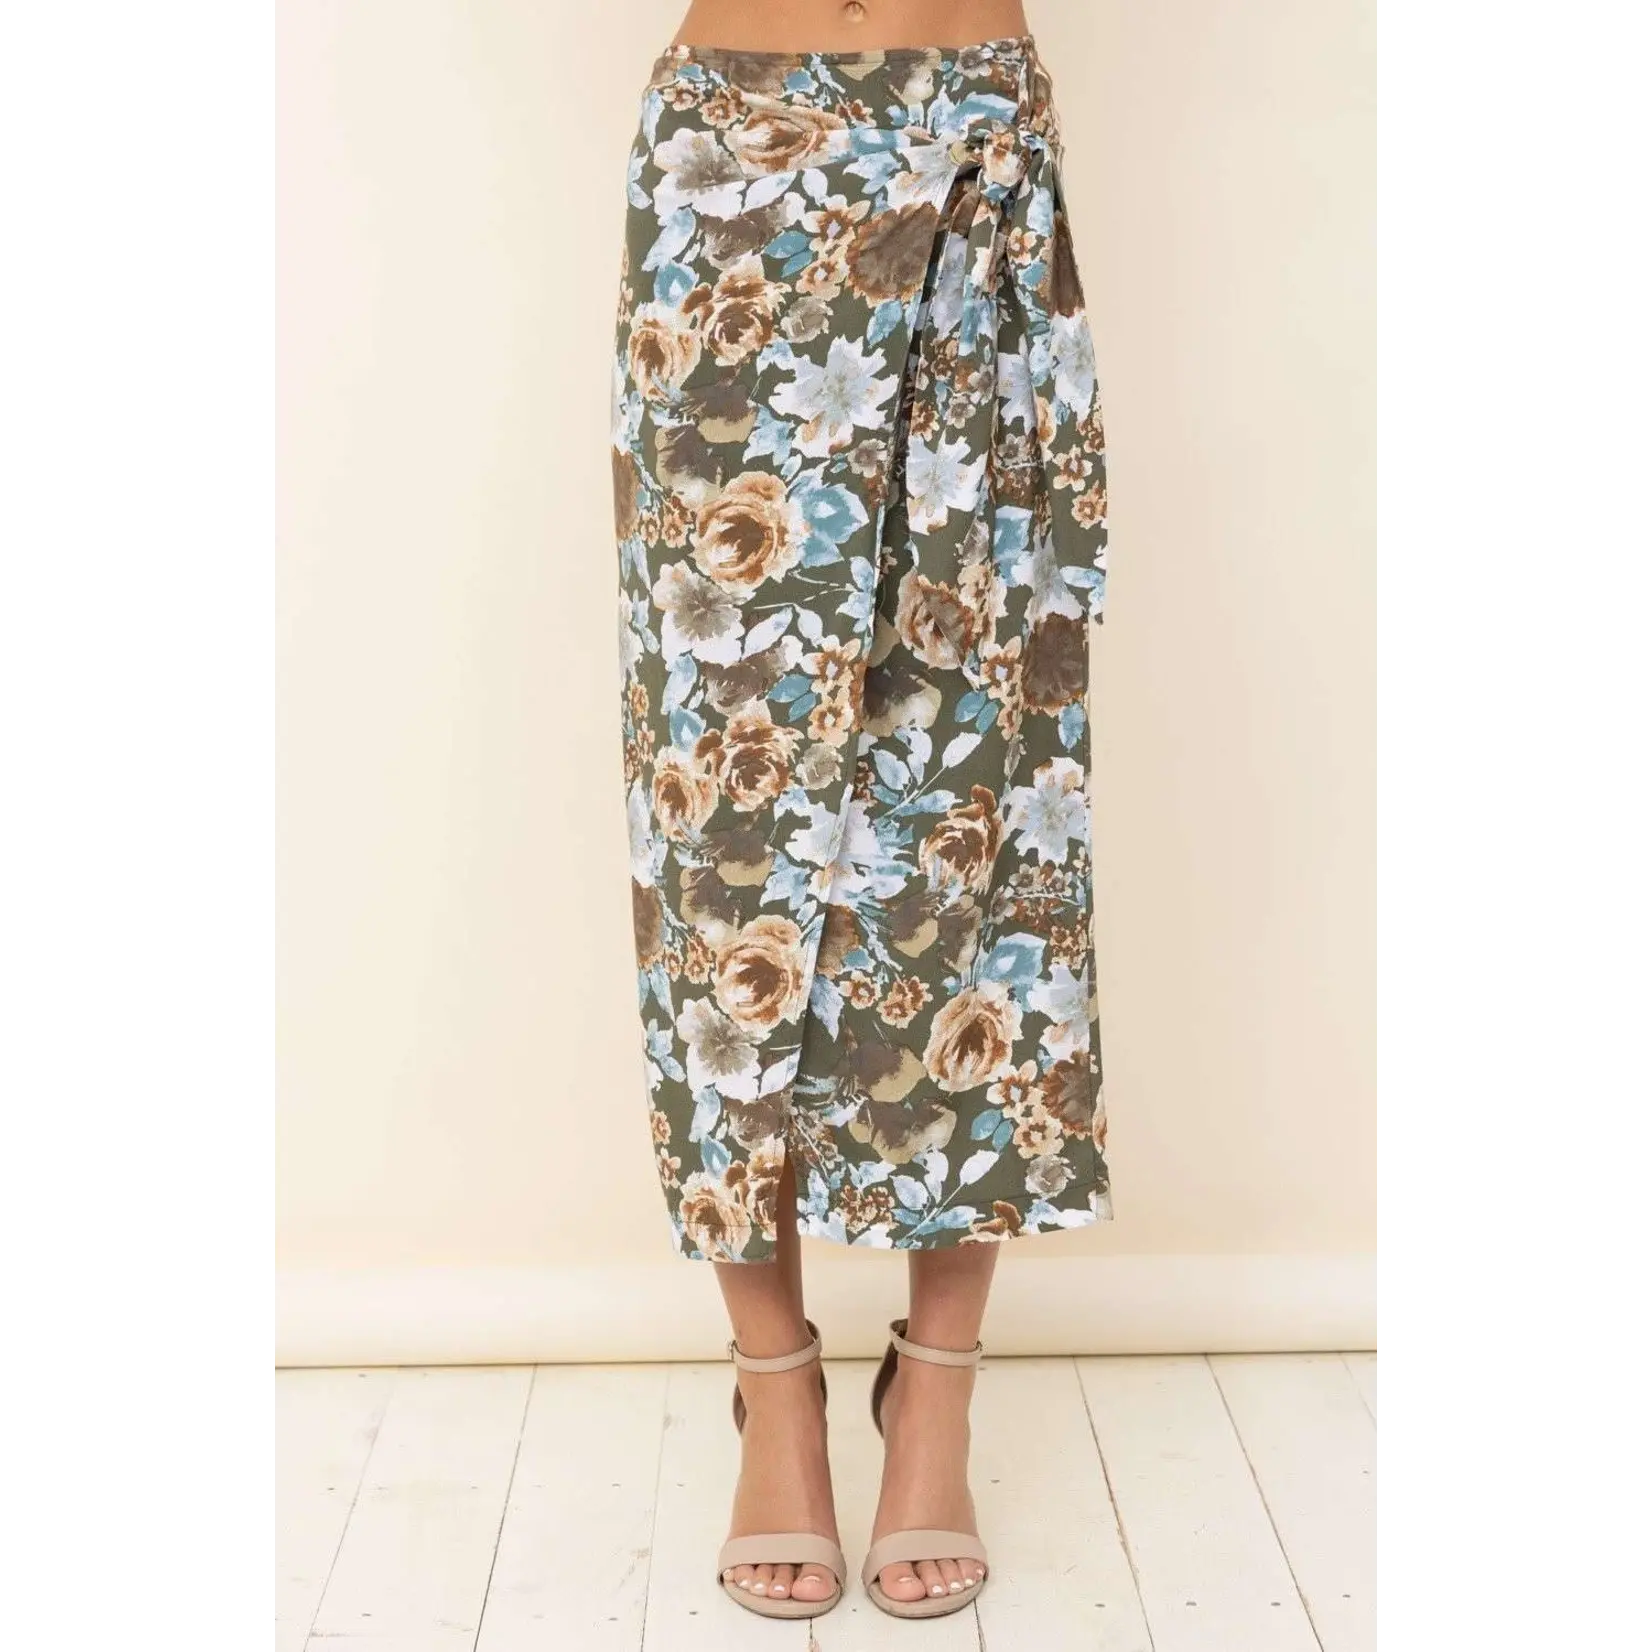 Olive floral maxi skirt with tie